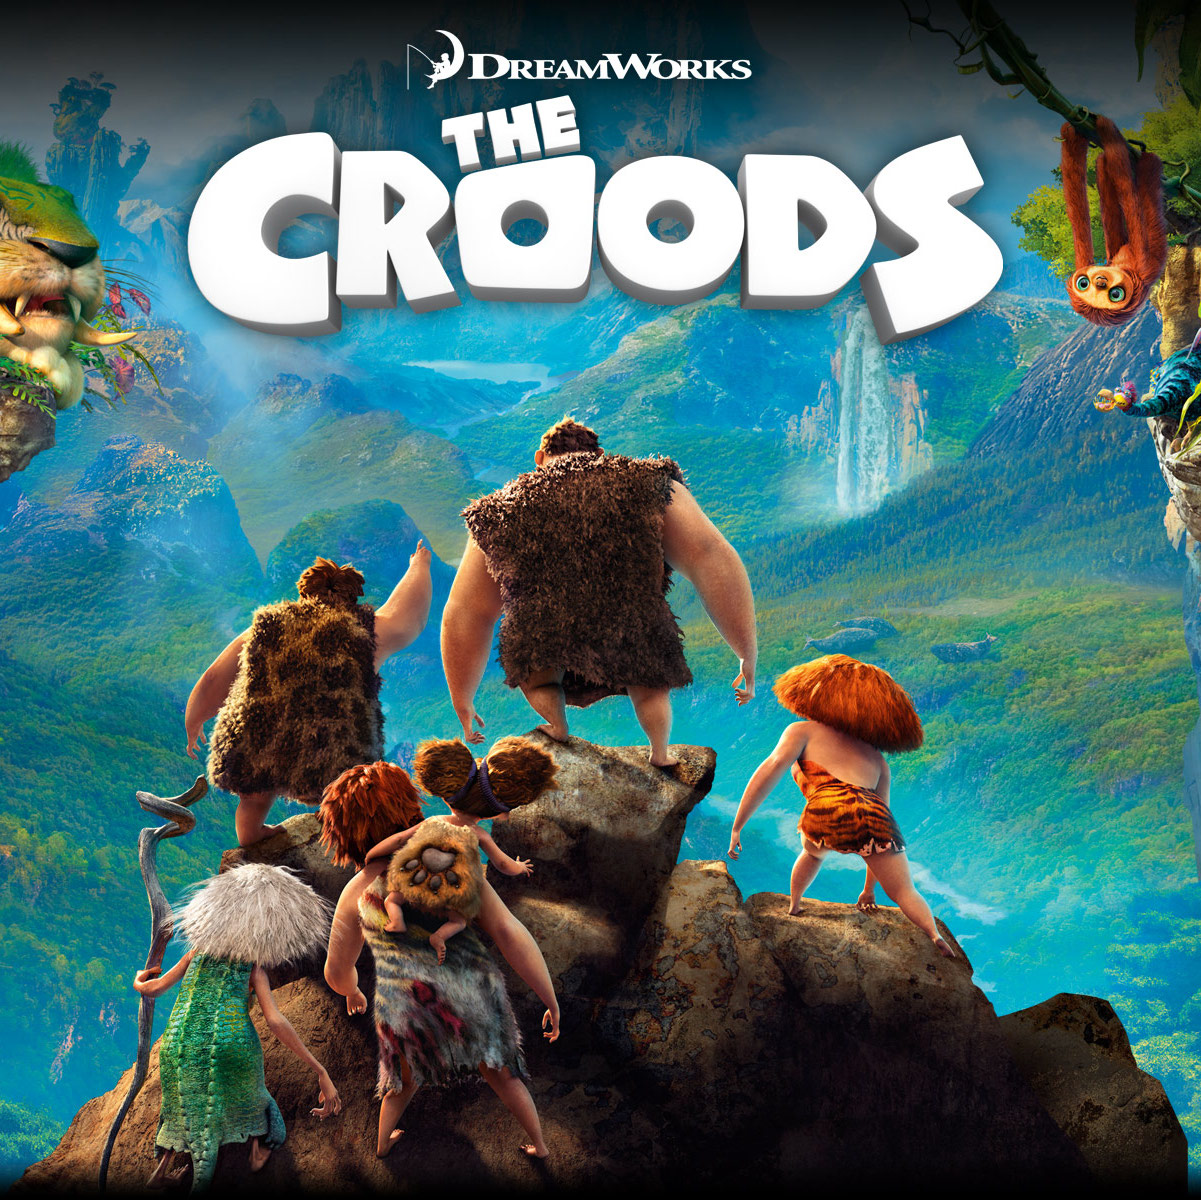 ea_croods_poster